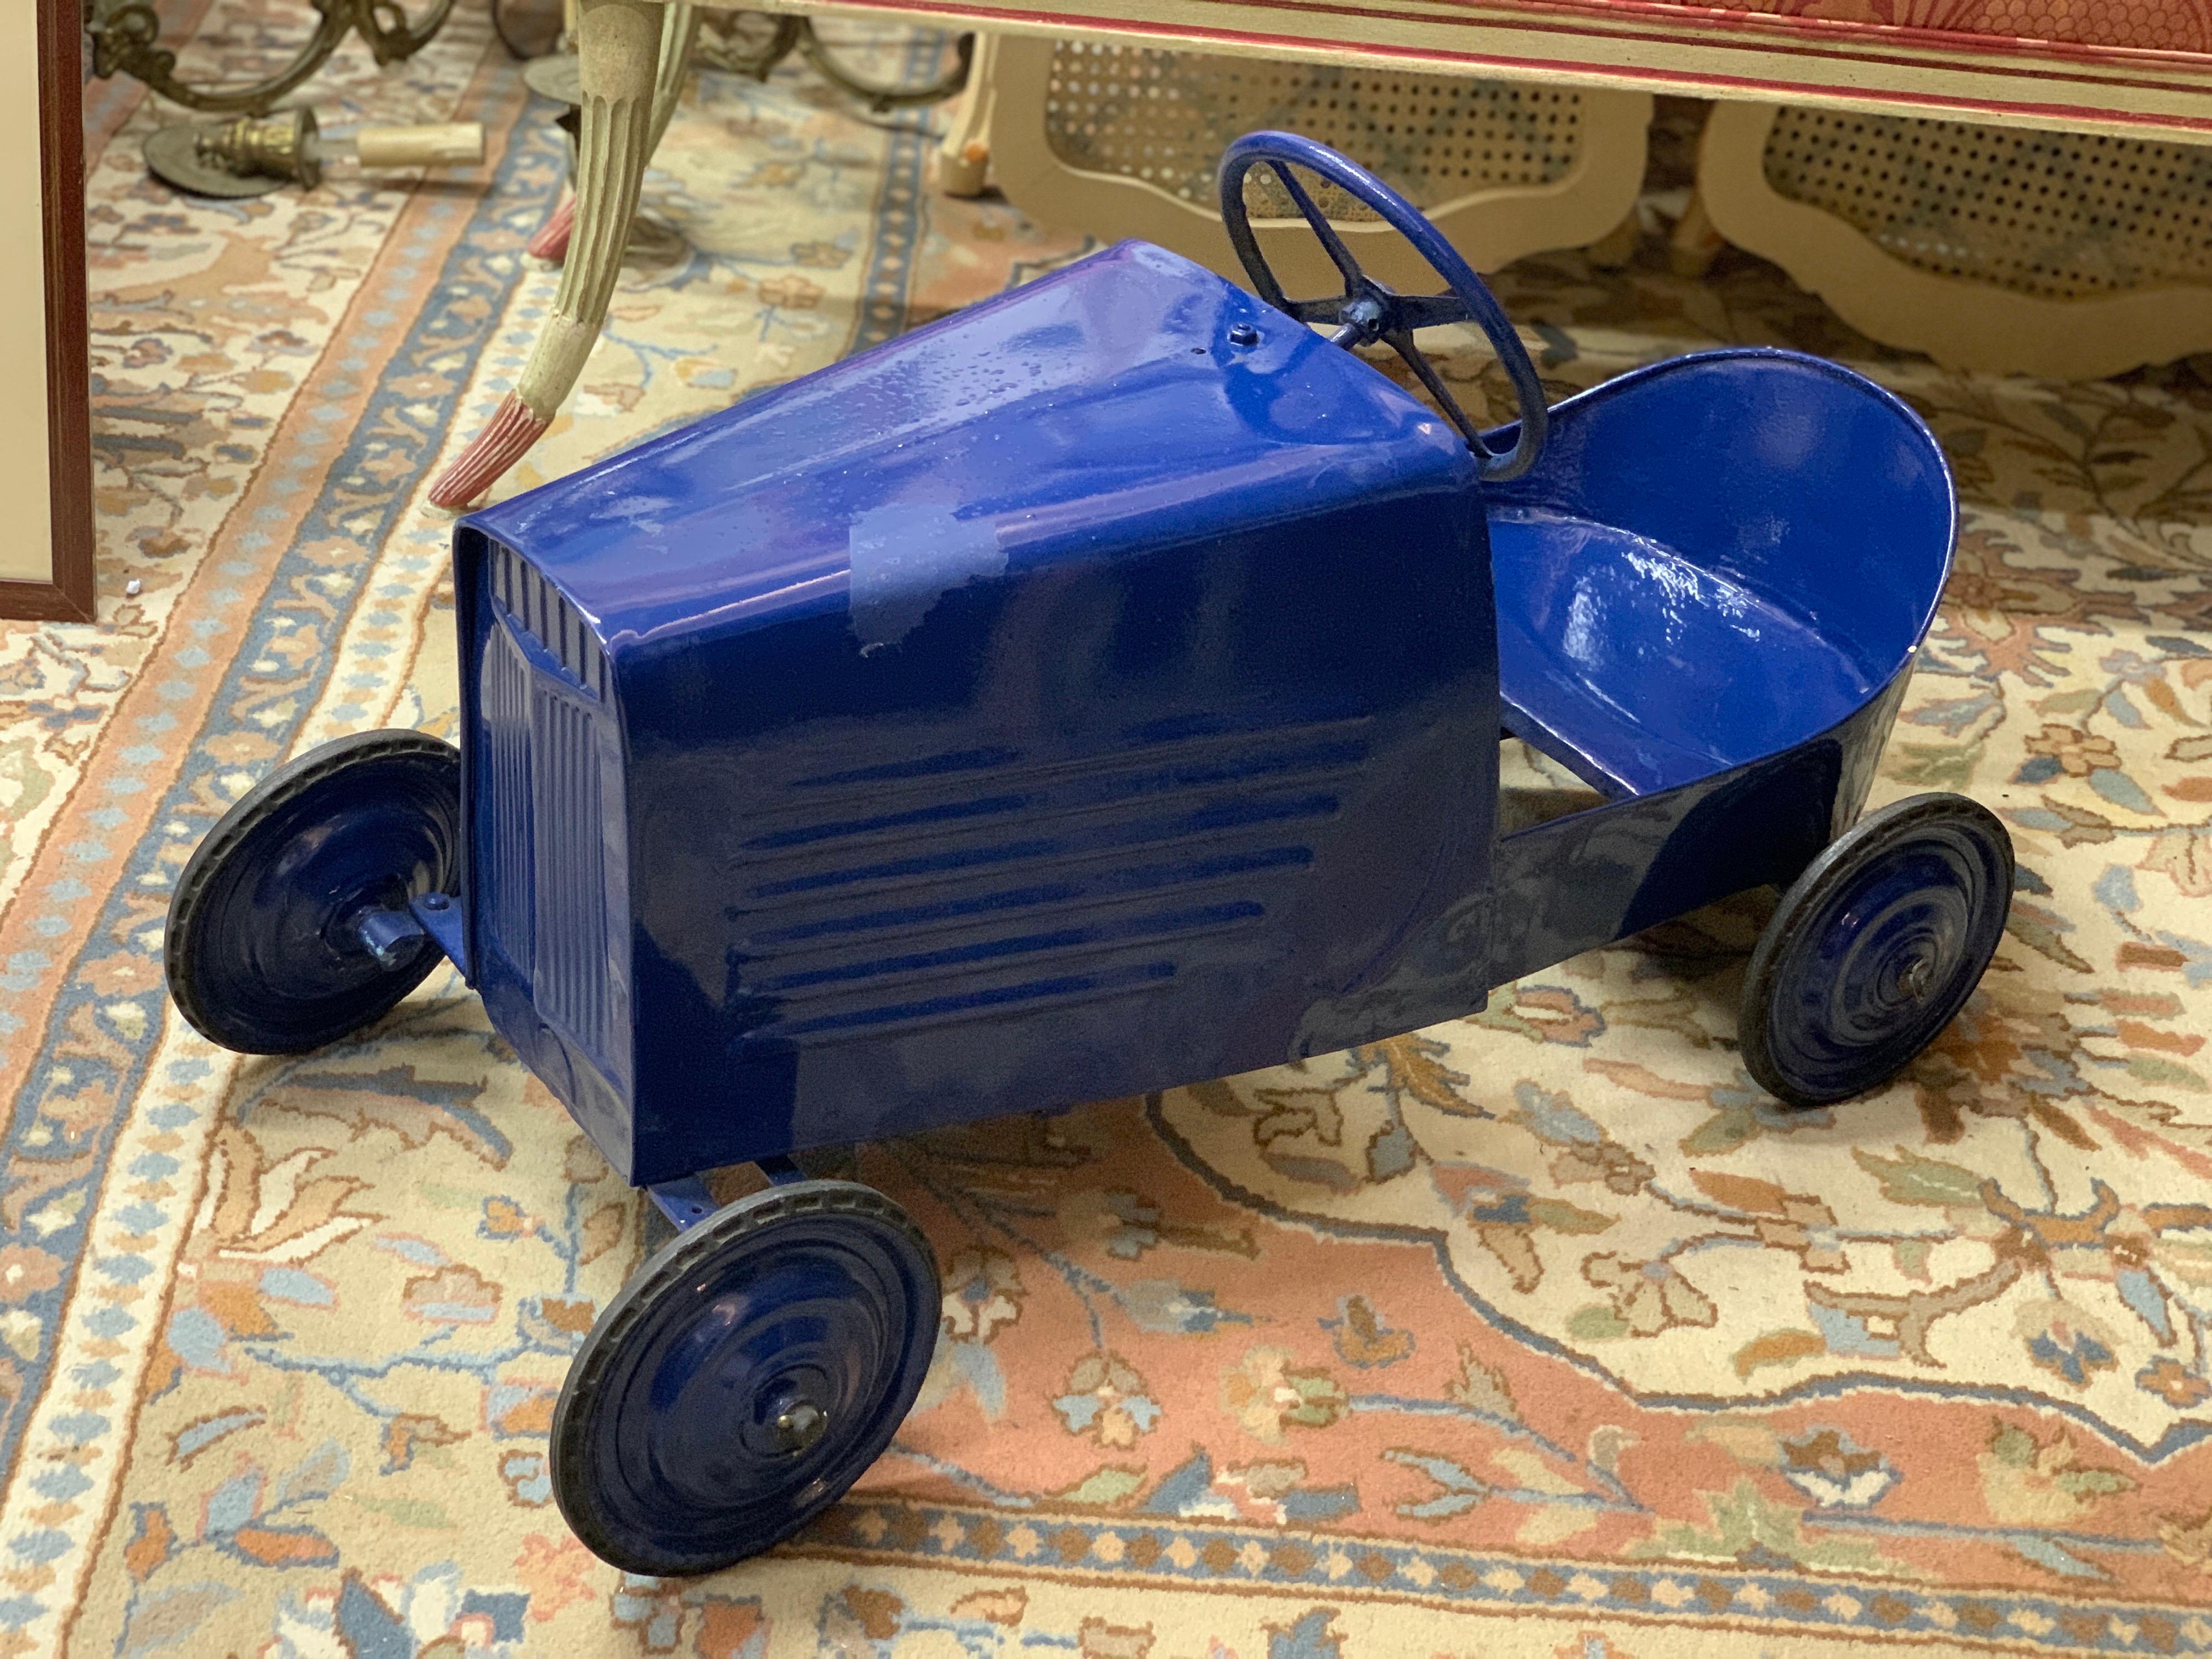 Stunning large sized vintage pedal car in blue azure. Very good condition with some traces of use and age.
France, circa 1950.
 